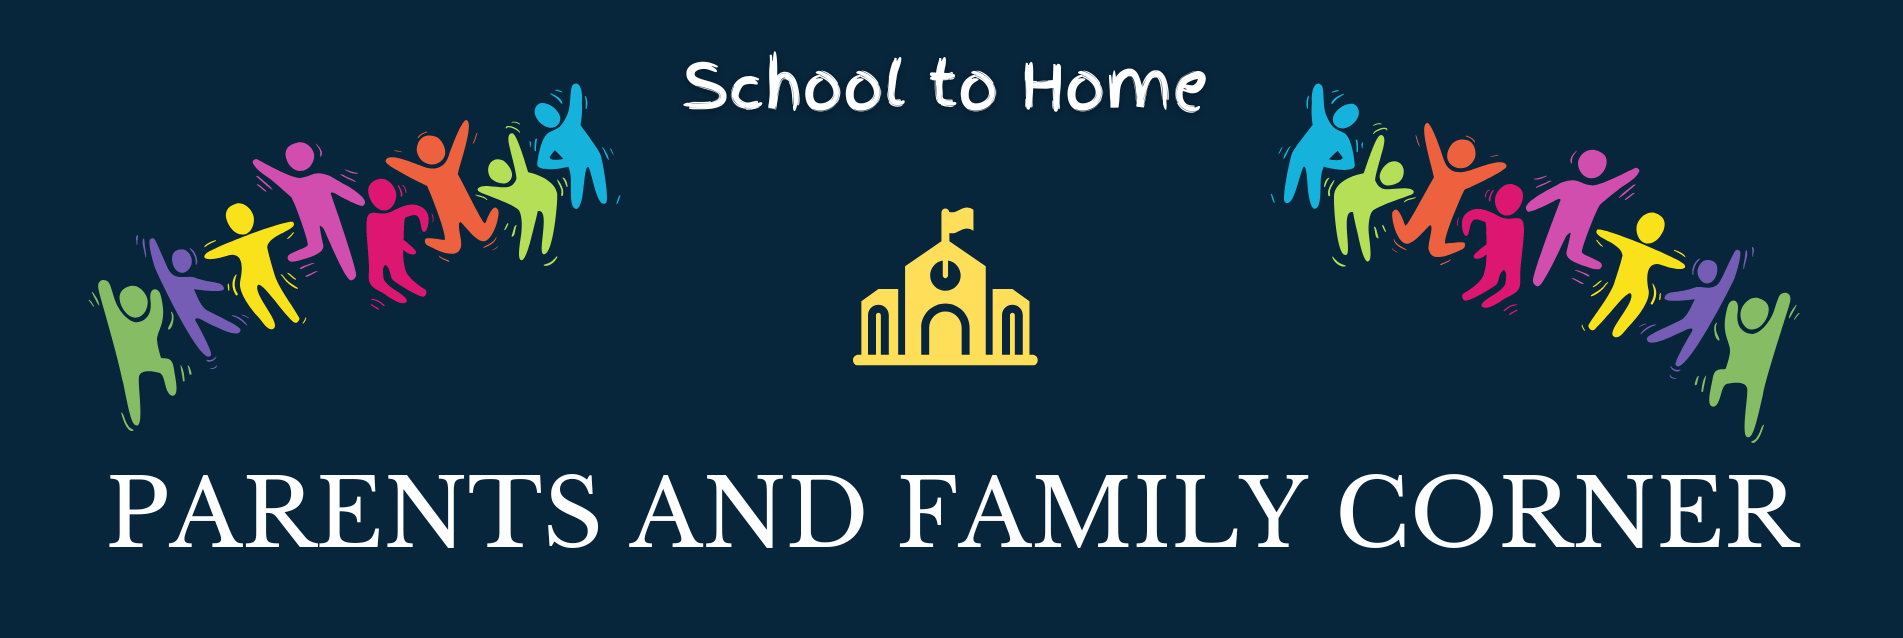 parents and family corner banner with clipart school house and colorful people